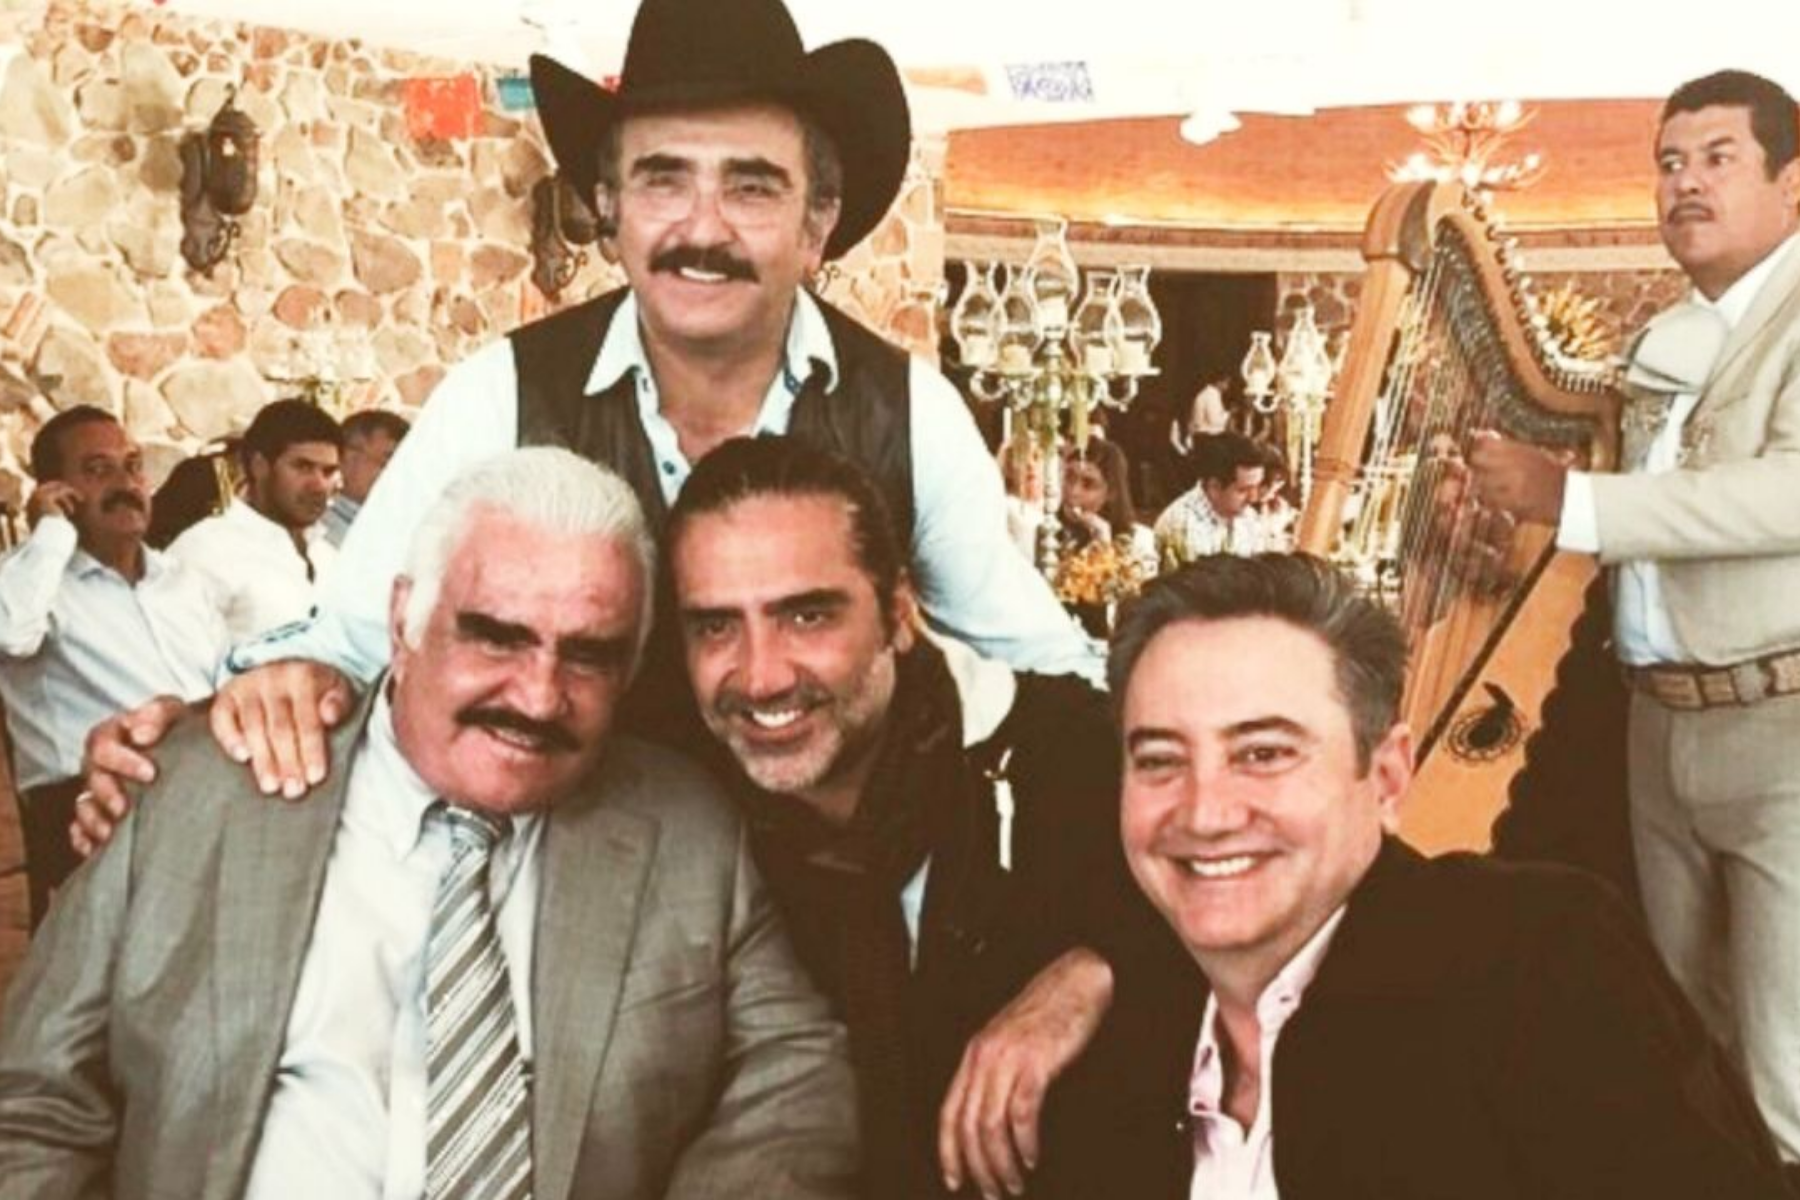 Vicente Fernández and his three sons in an event